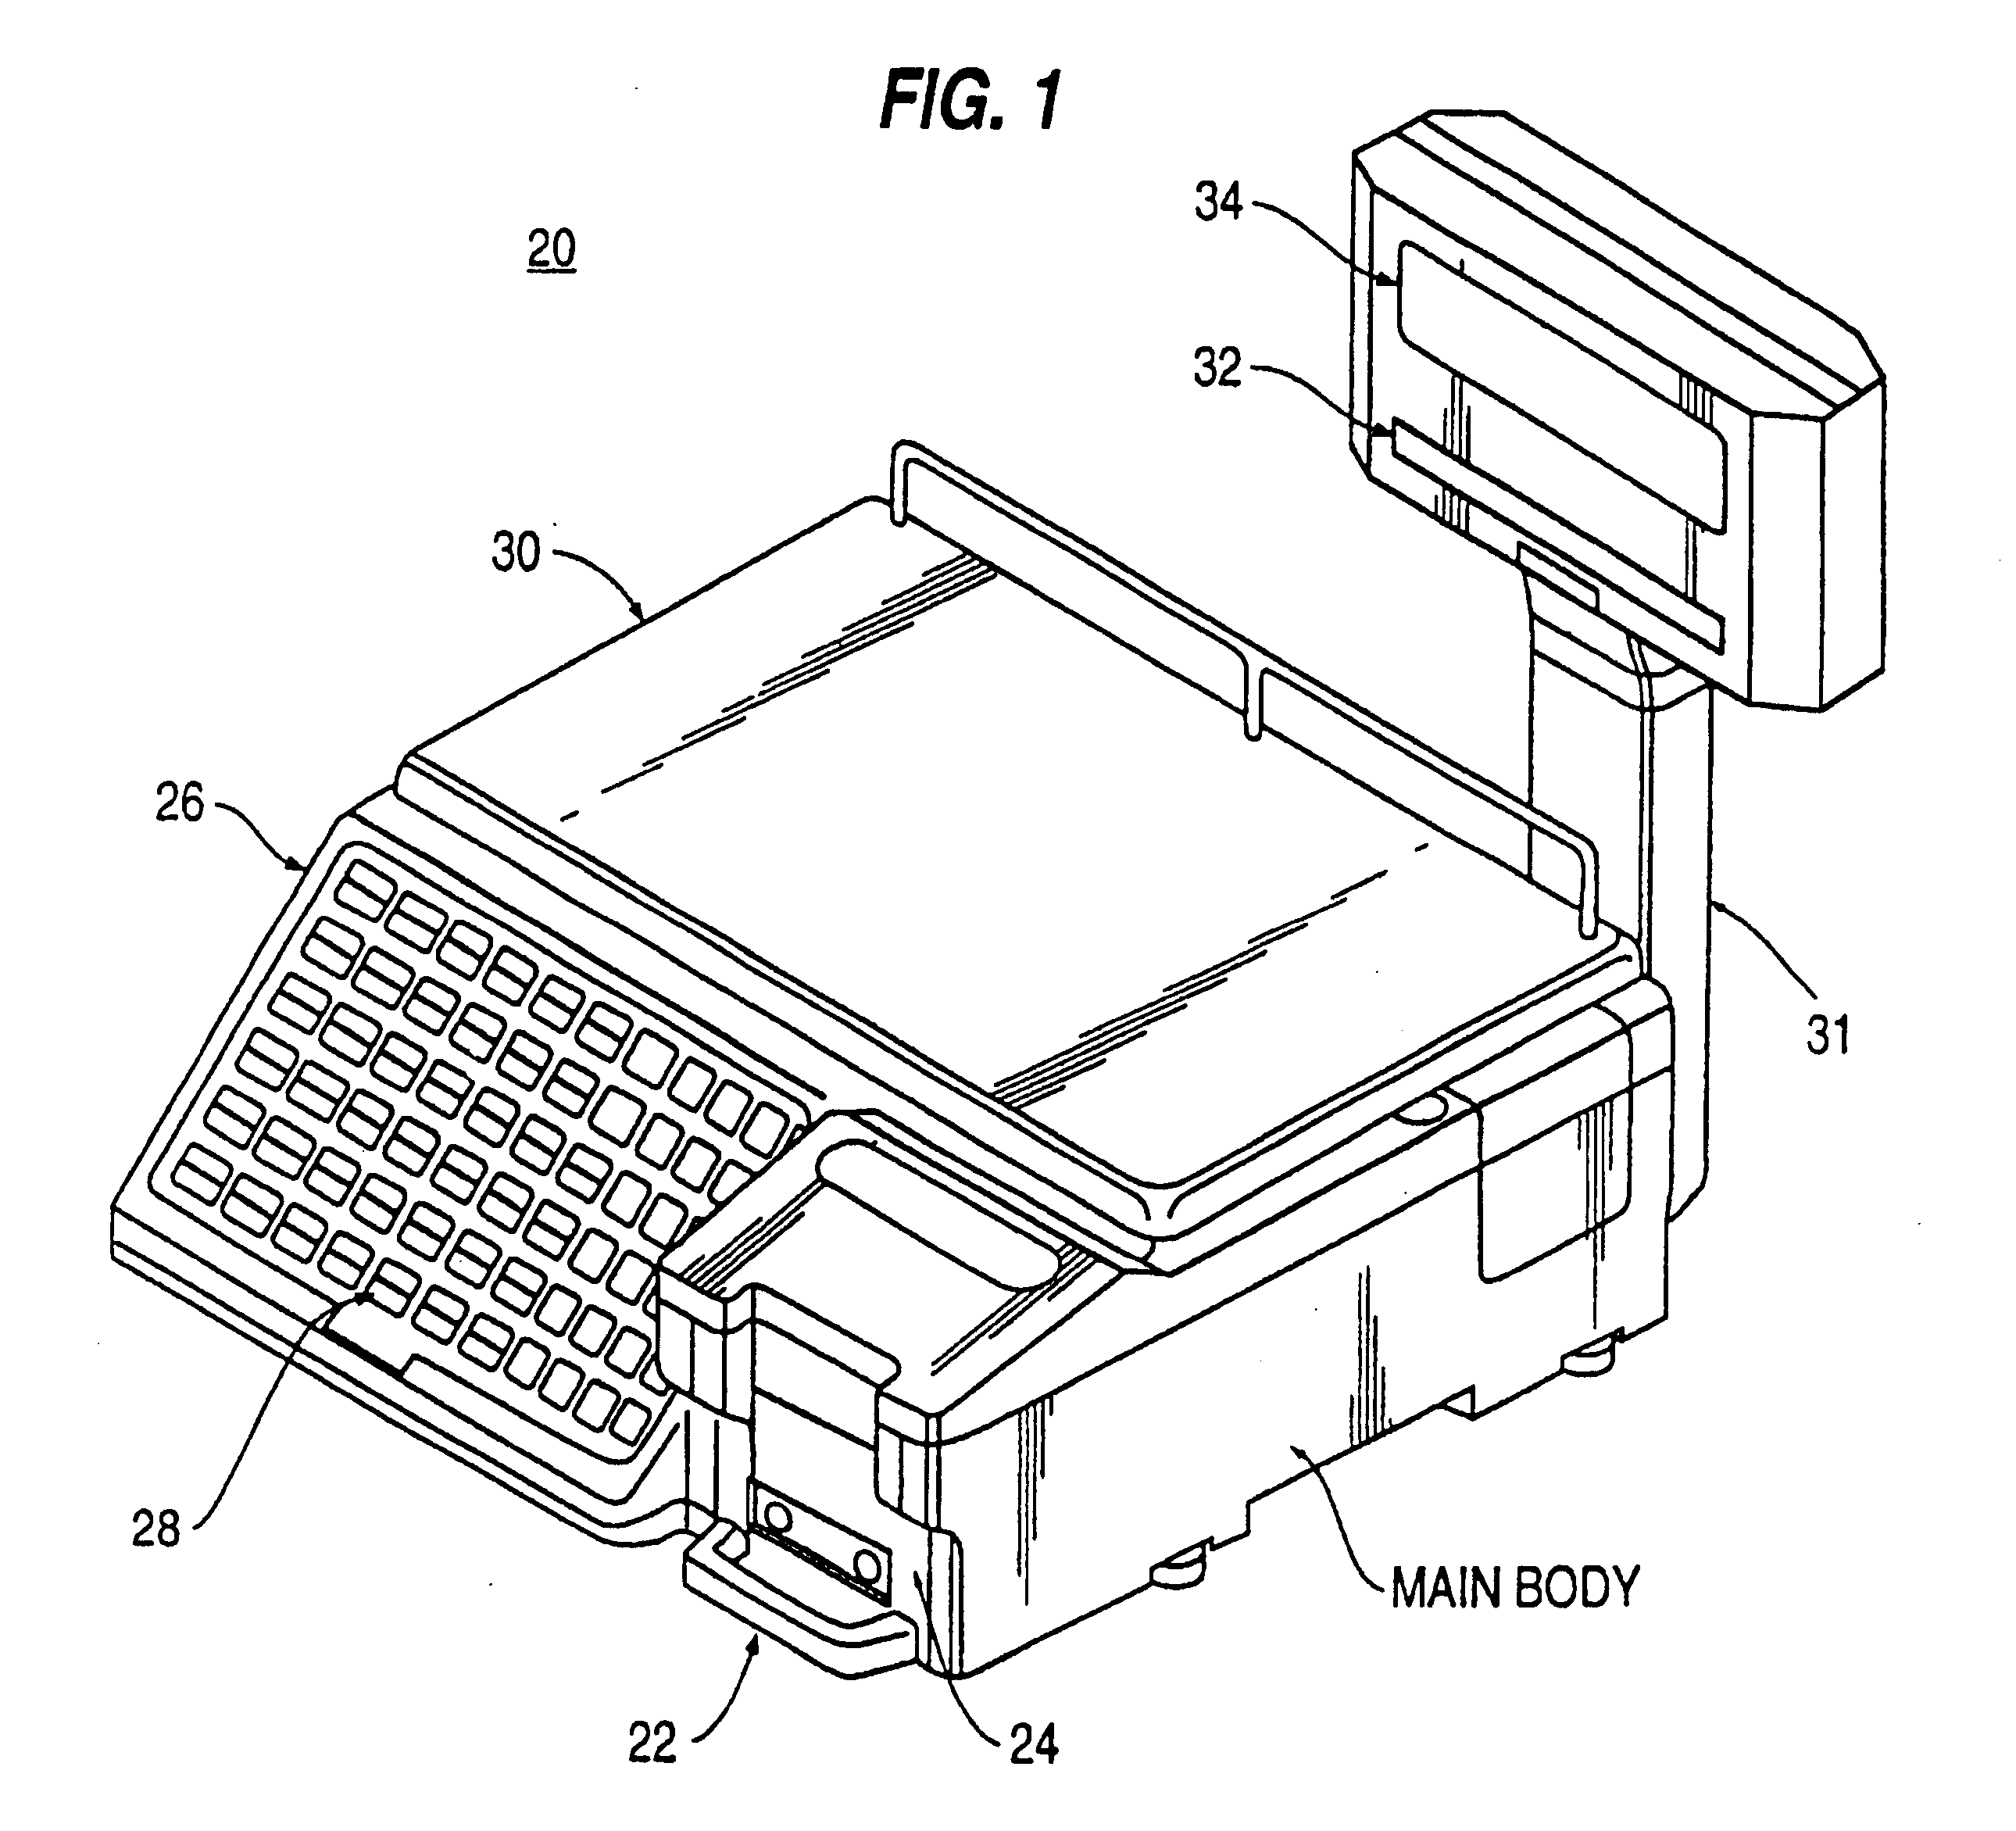 Method and apparatus for printing merchandising information